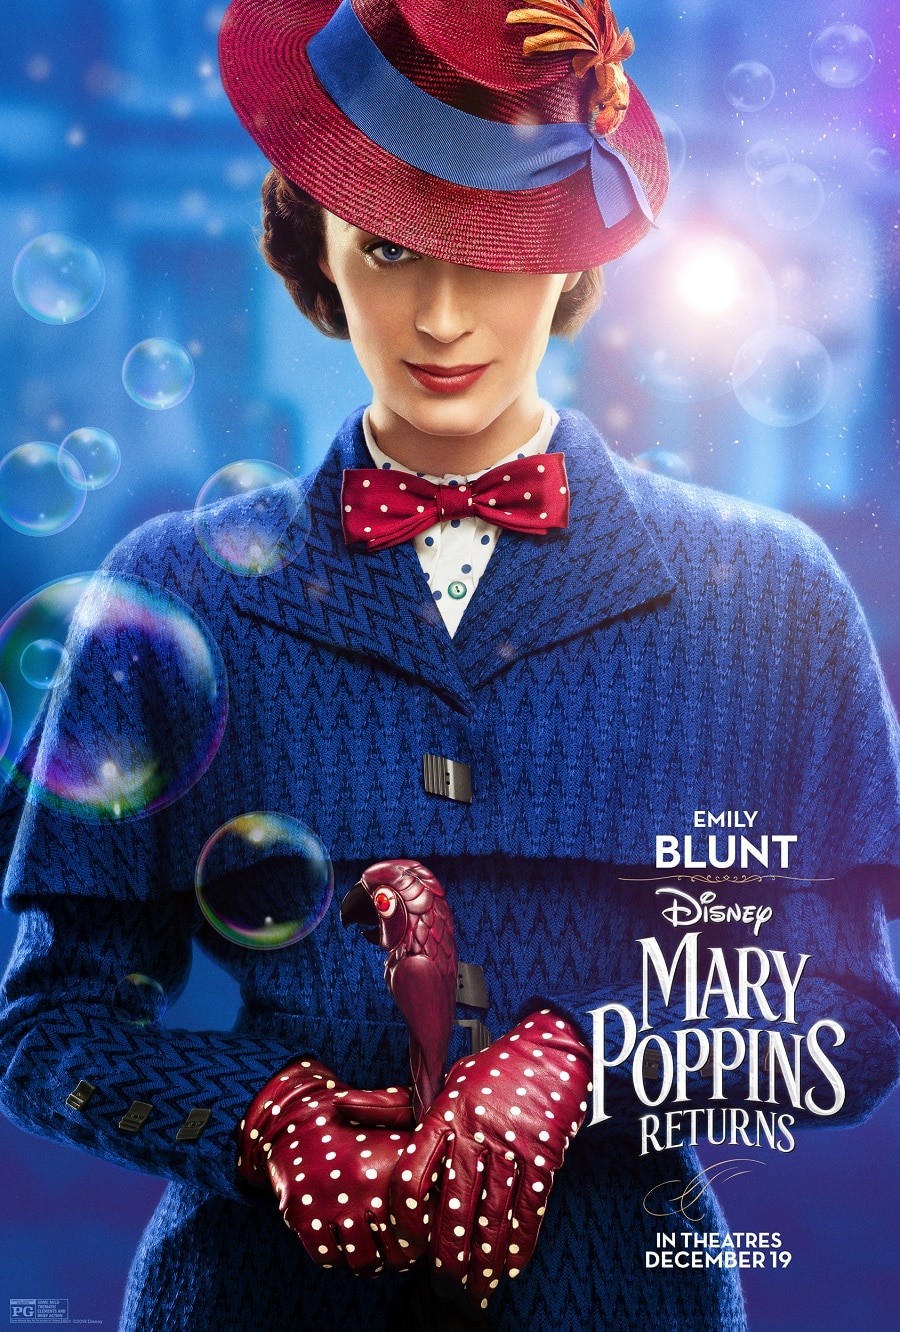 Find Out How Emily Blunt Prepared To Take On The Role Of Mary Poppins